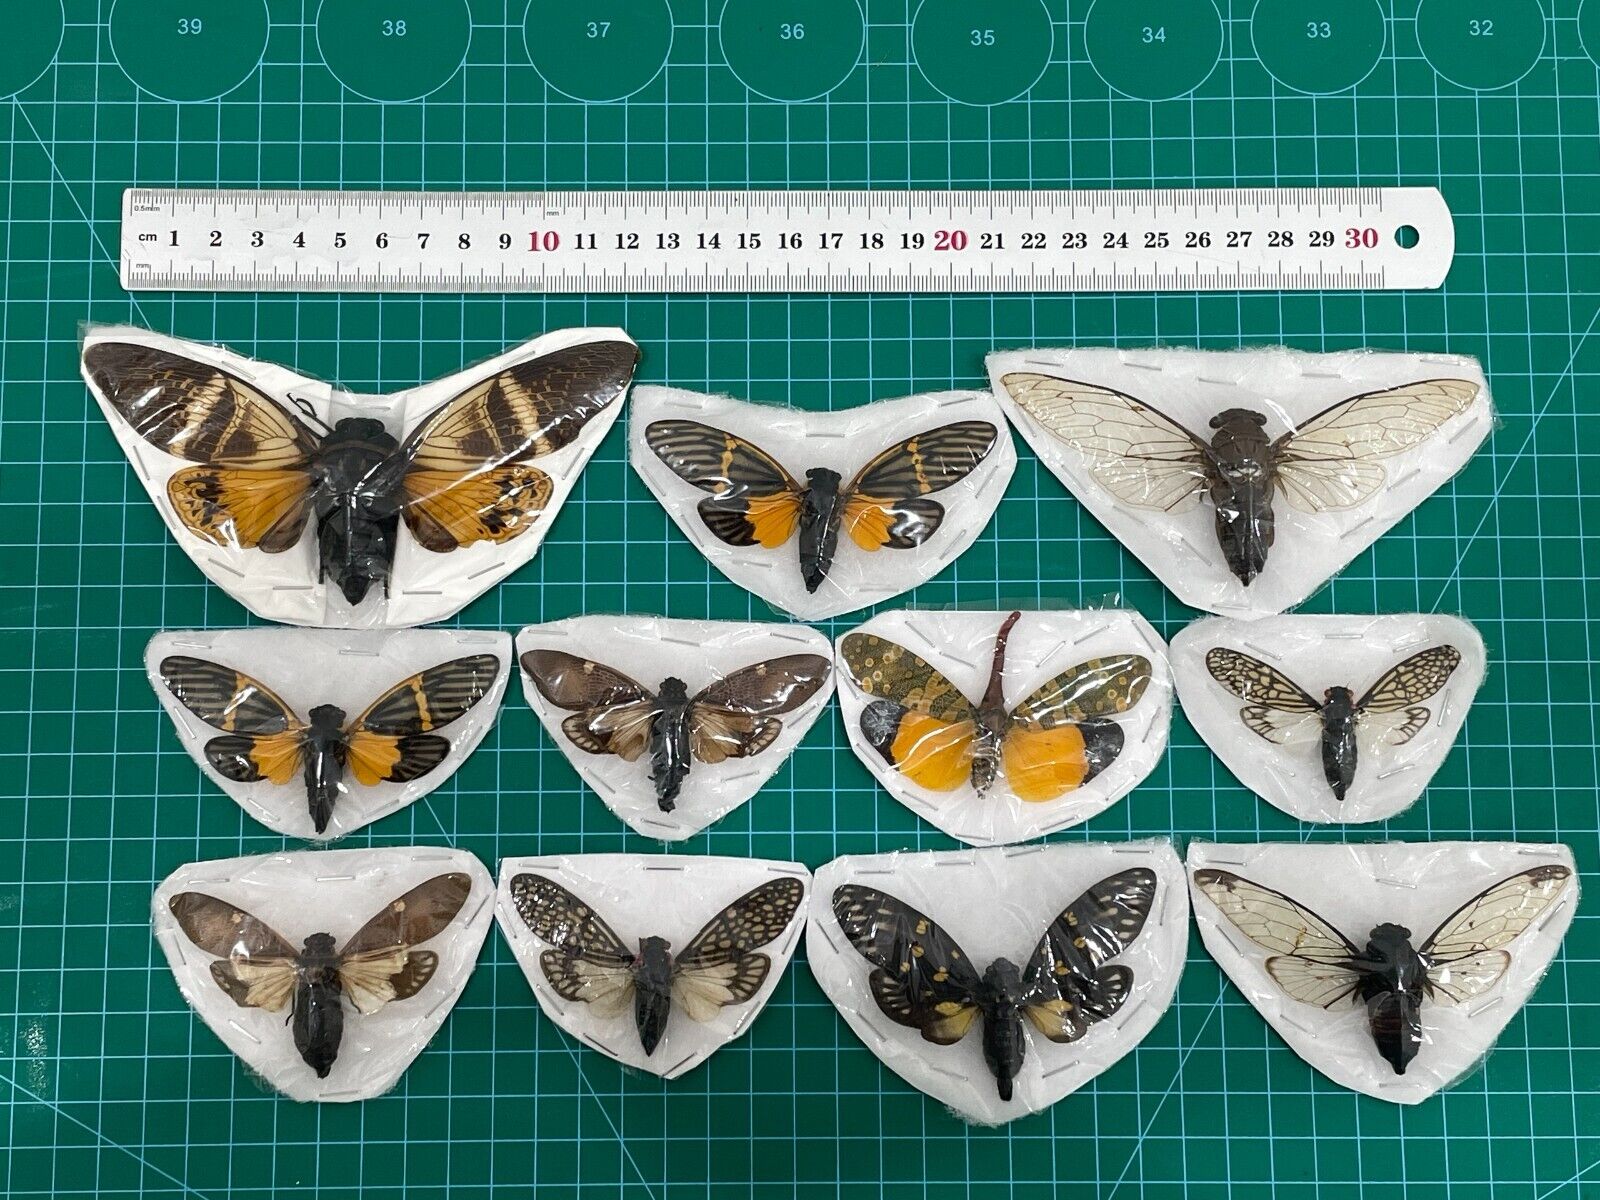 Real 10 Assorted Beetles Cicada Moth Death Heads Insect Butterflies Taxidermy